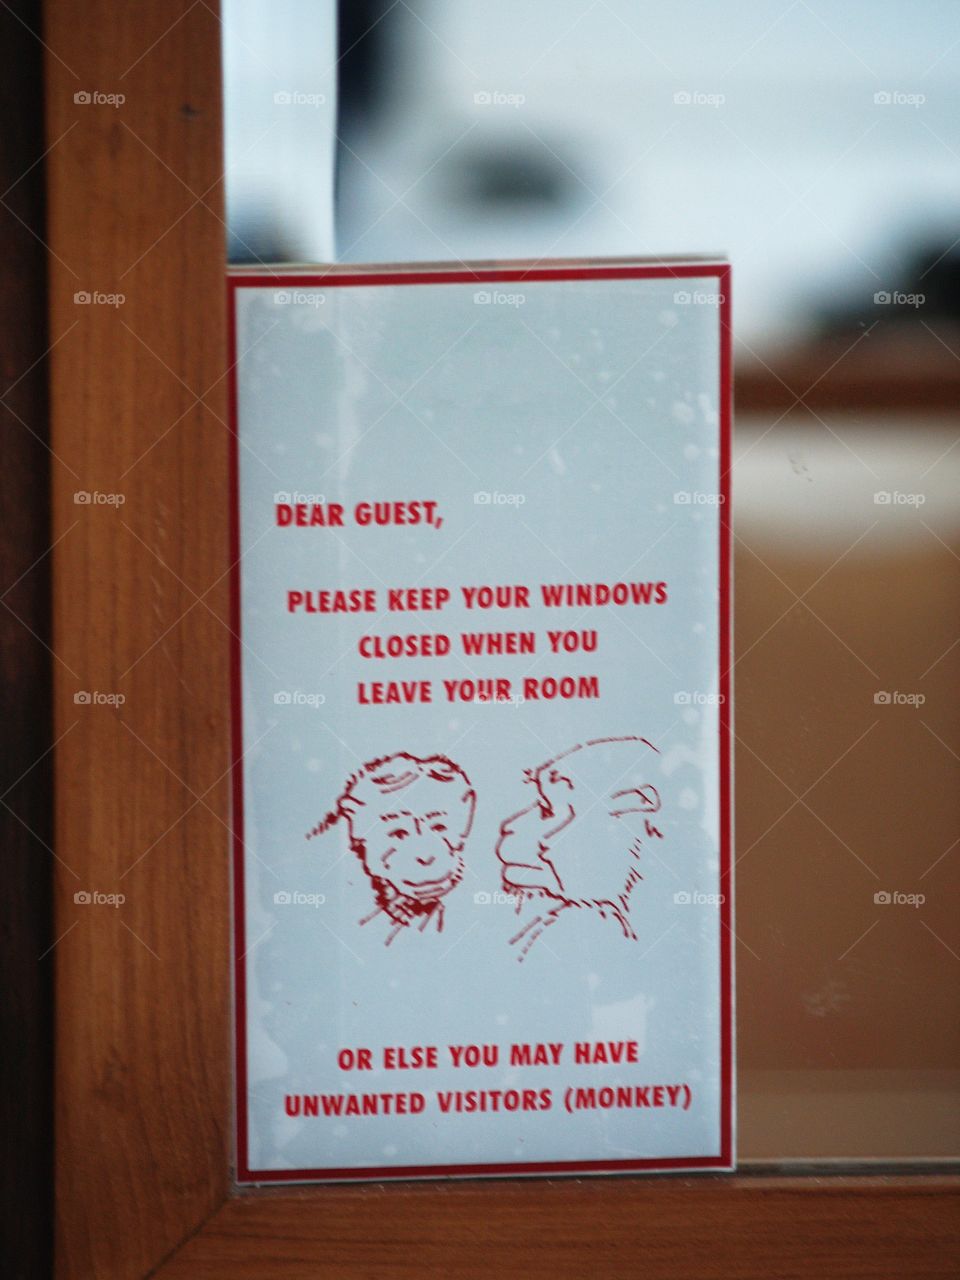 An India hotel room notice warns guests to make sure their windows are closed to prevent unwanted entry by monkeys.